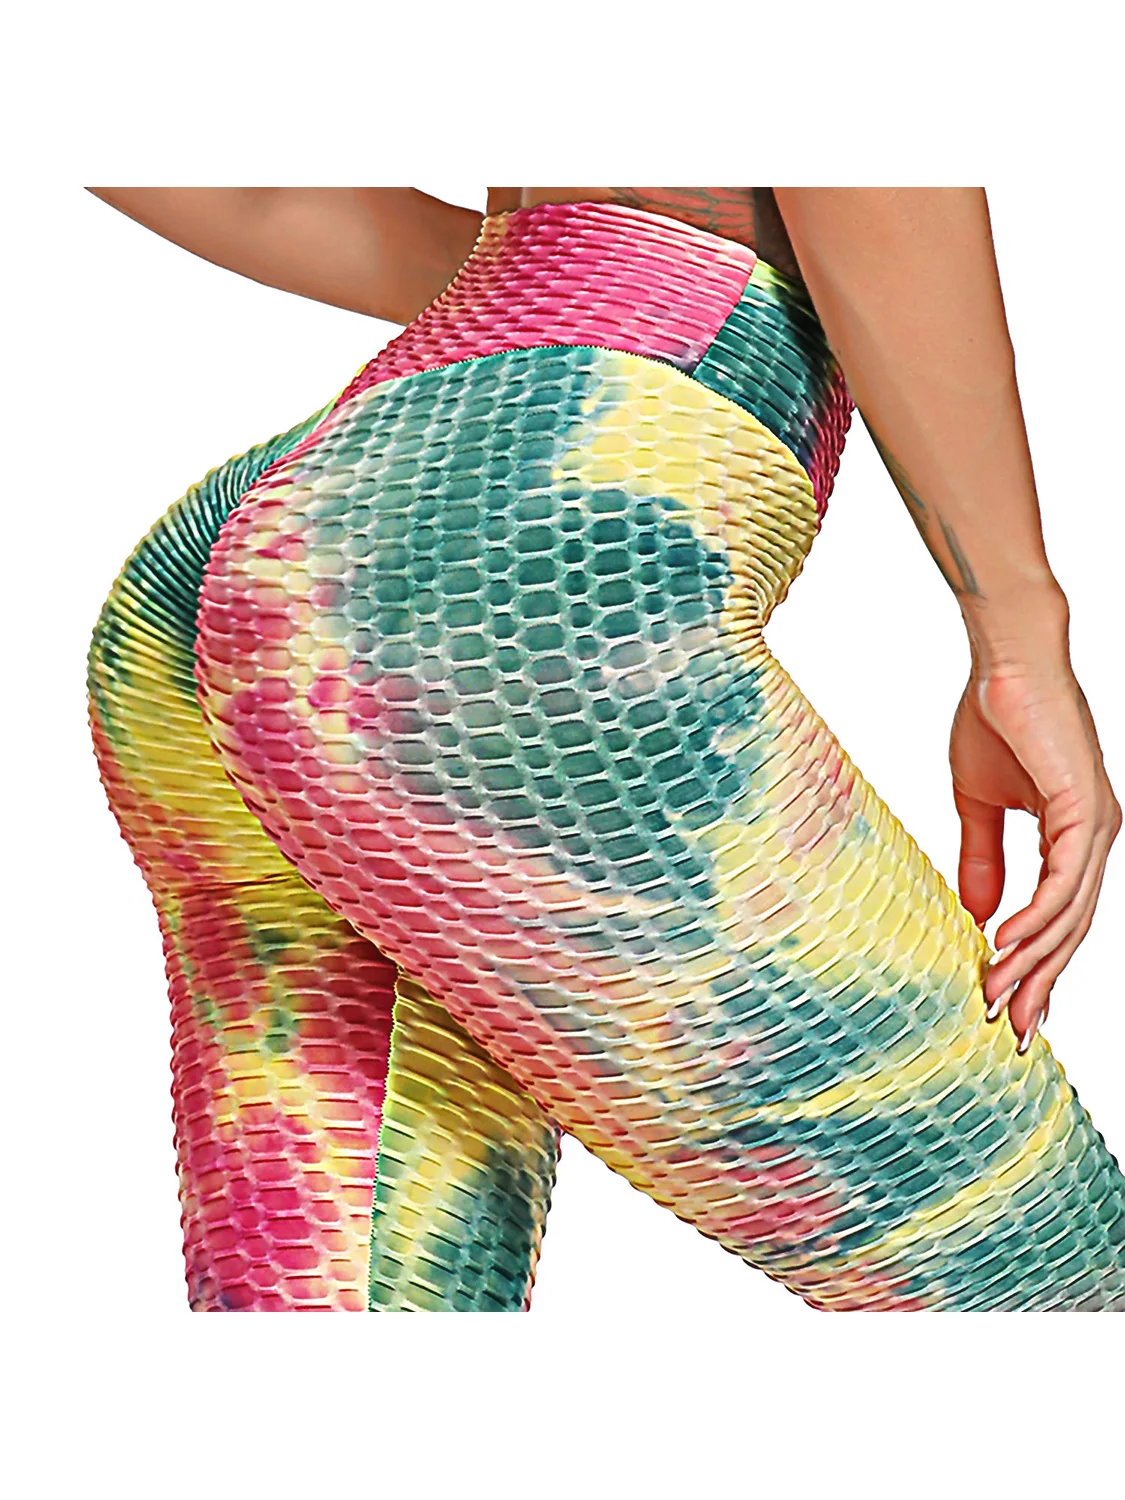 Scrunch Back Fitness Leggings Hips Up Booty Workout Pants Womens Gym Activewear For Fitness High Waist Long Pant Leggins Mujer 35